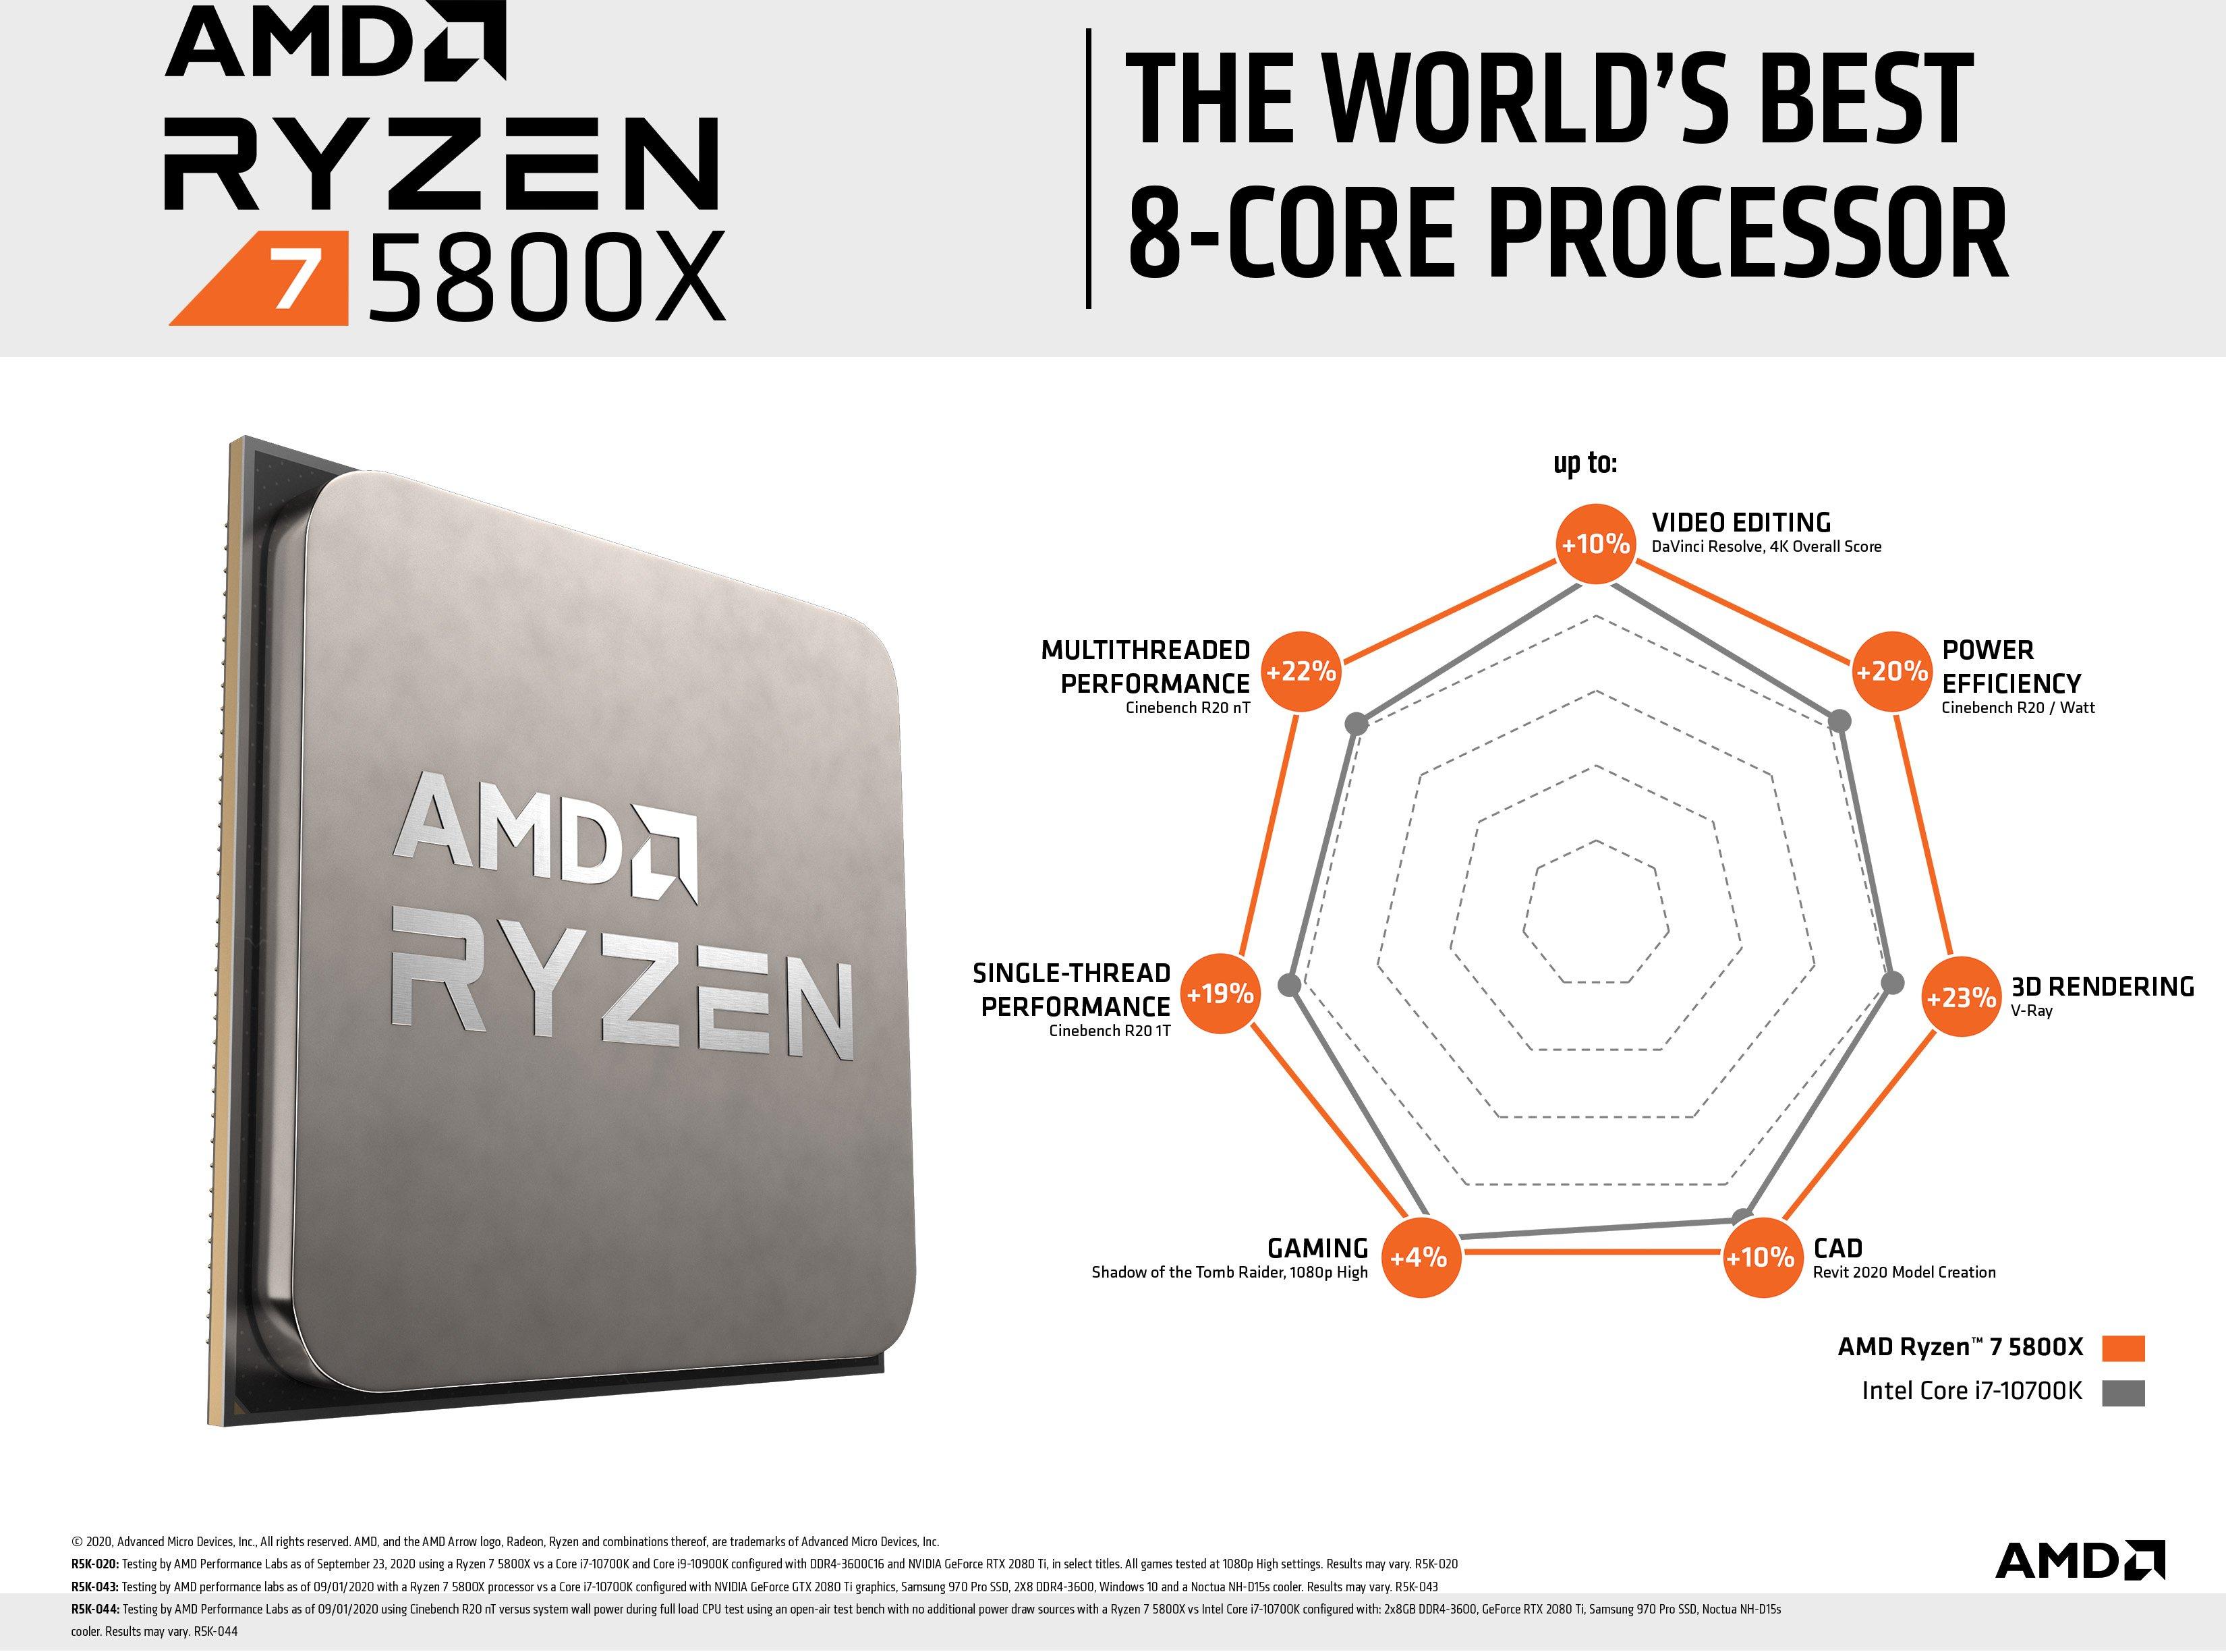 AMD Ryzen 7 5800X Review: New Eight-Core Processor Smashes It Out